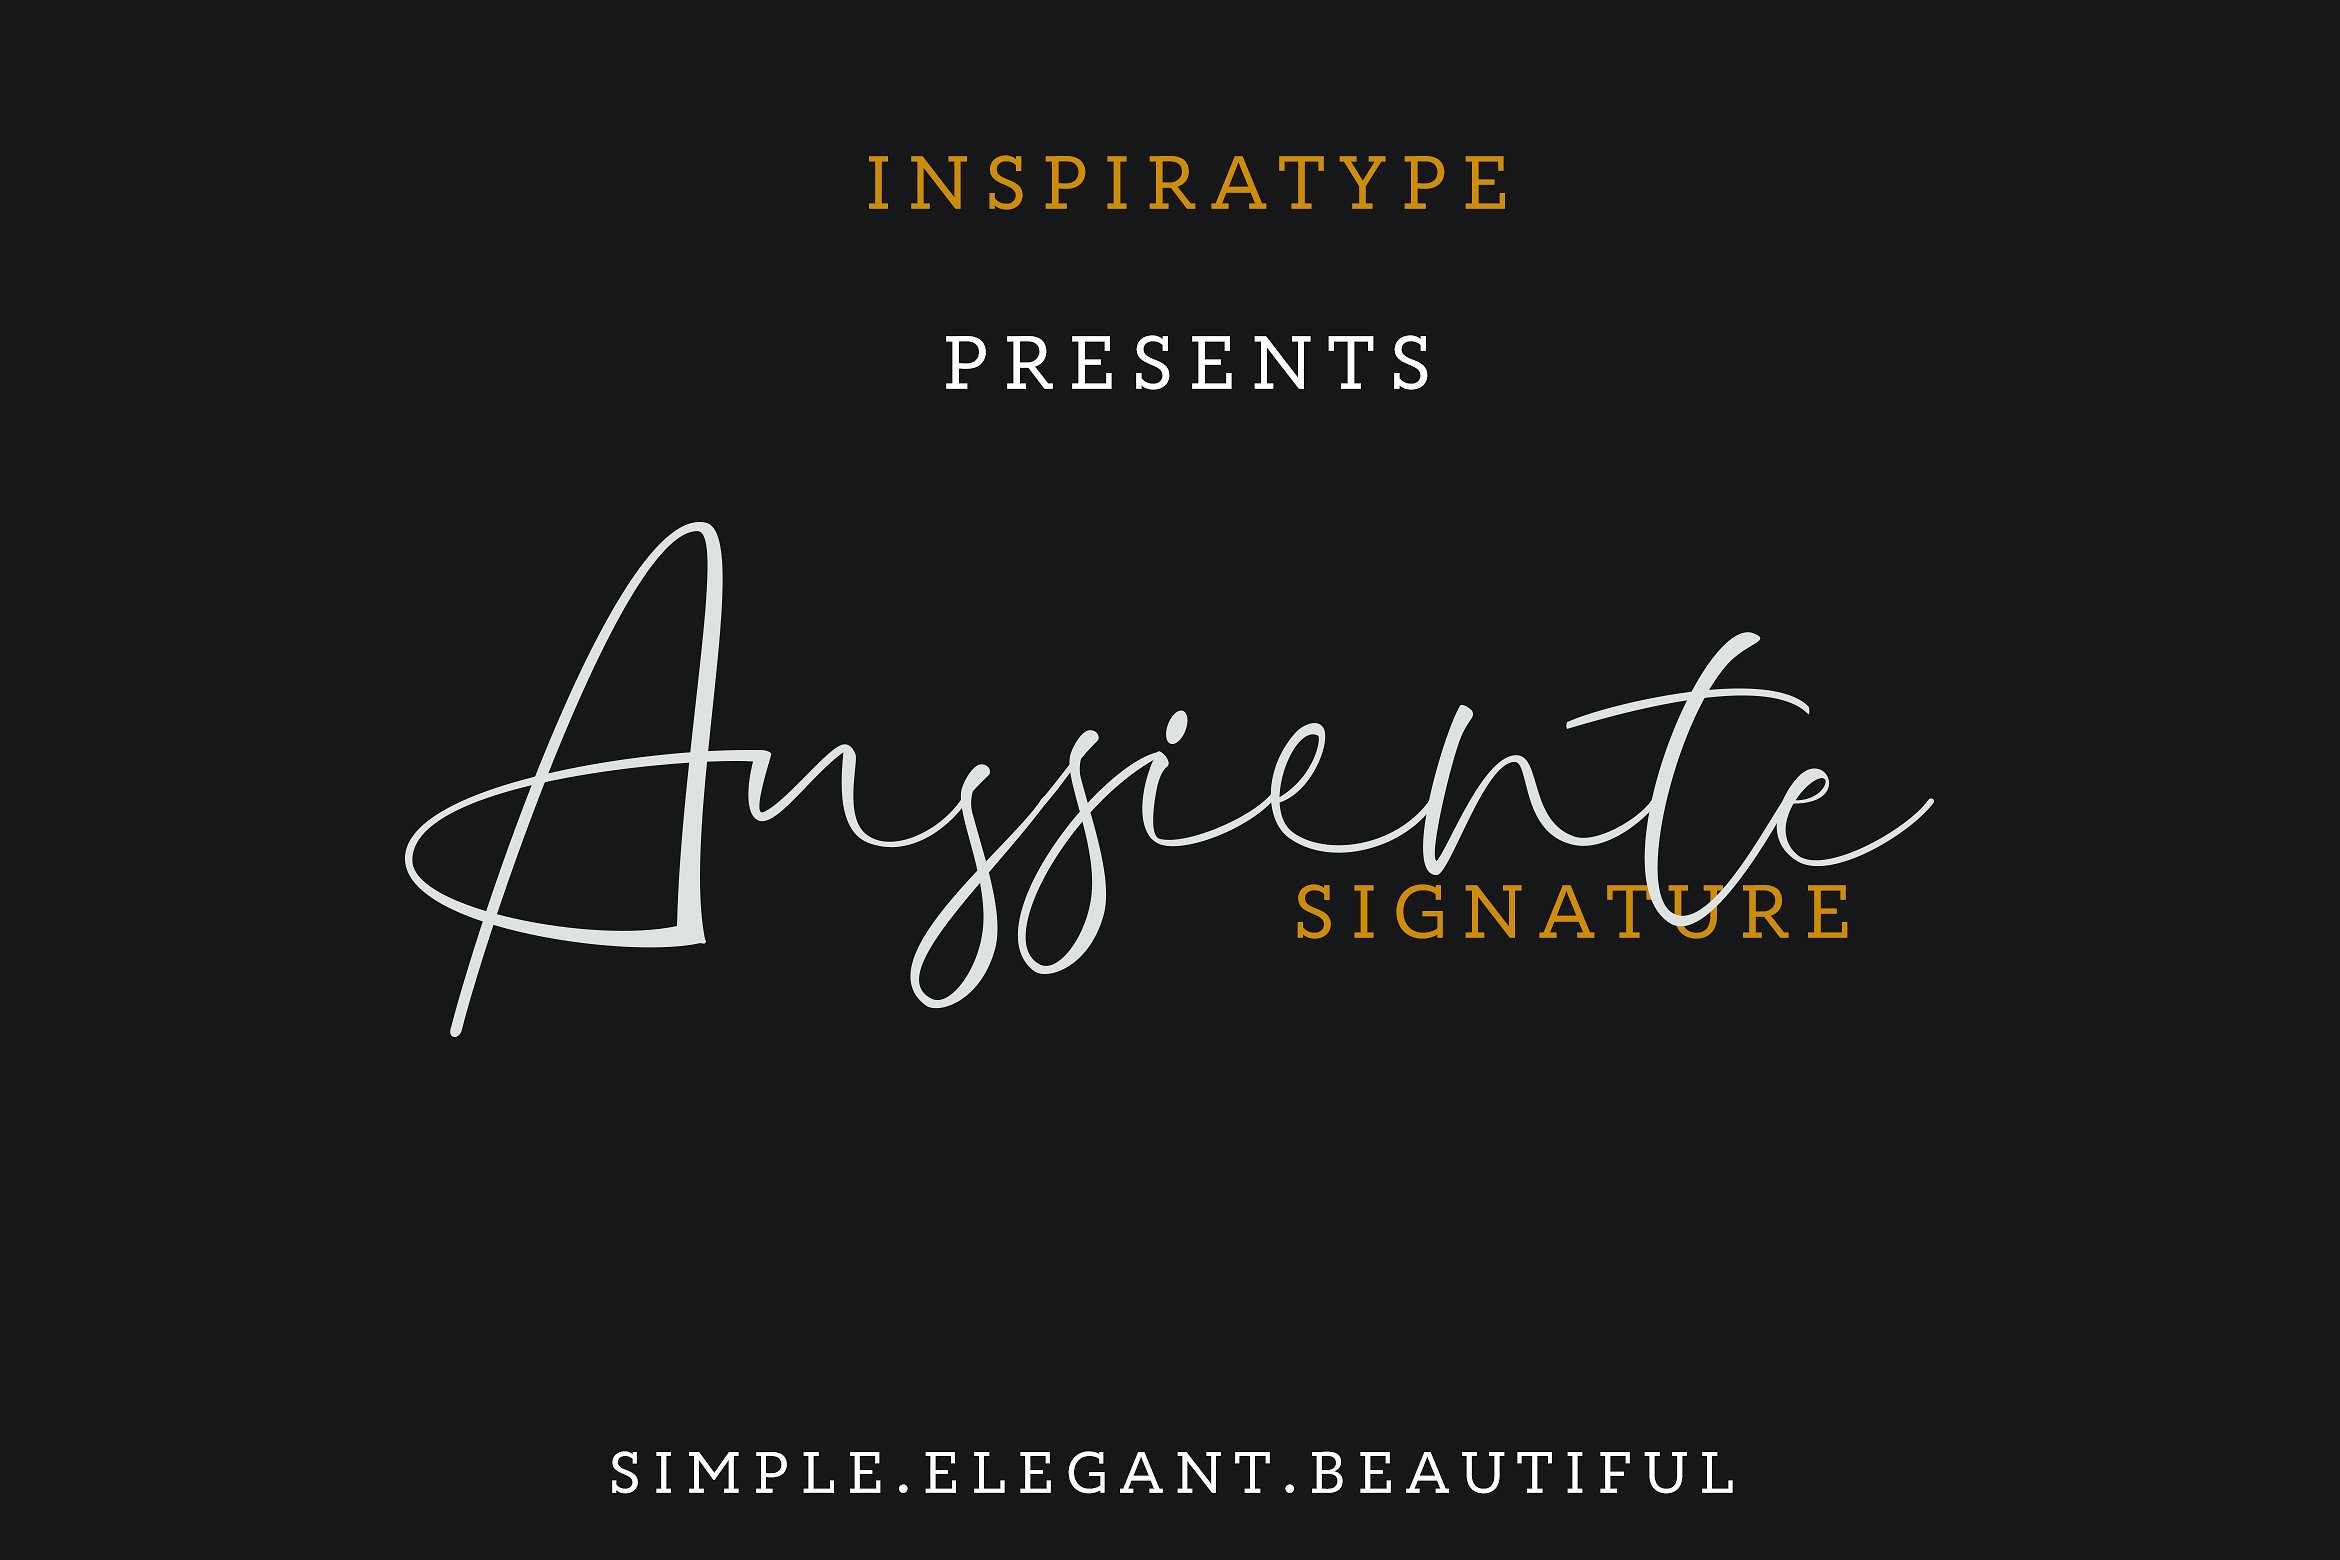 Download Free Aussiente Font Free Download Similar Fonts Fontget Fonts Typography